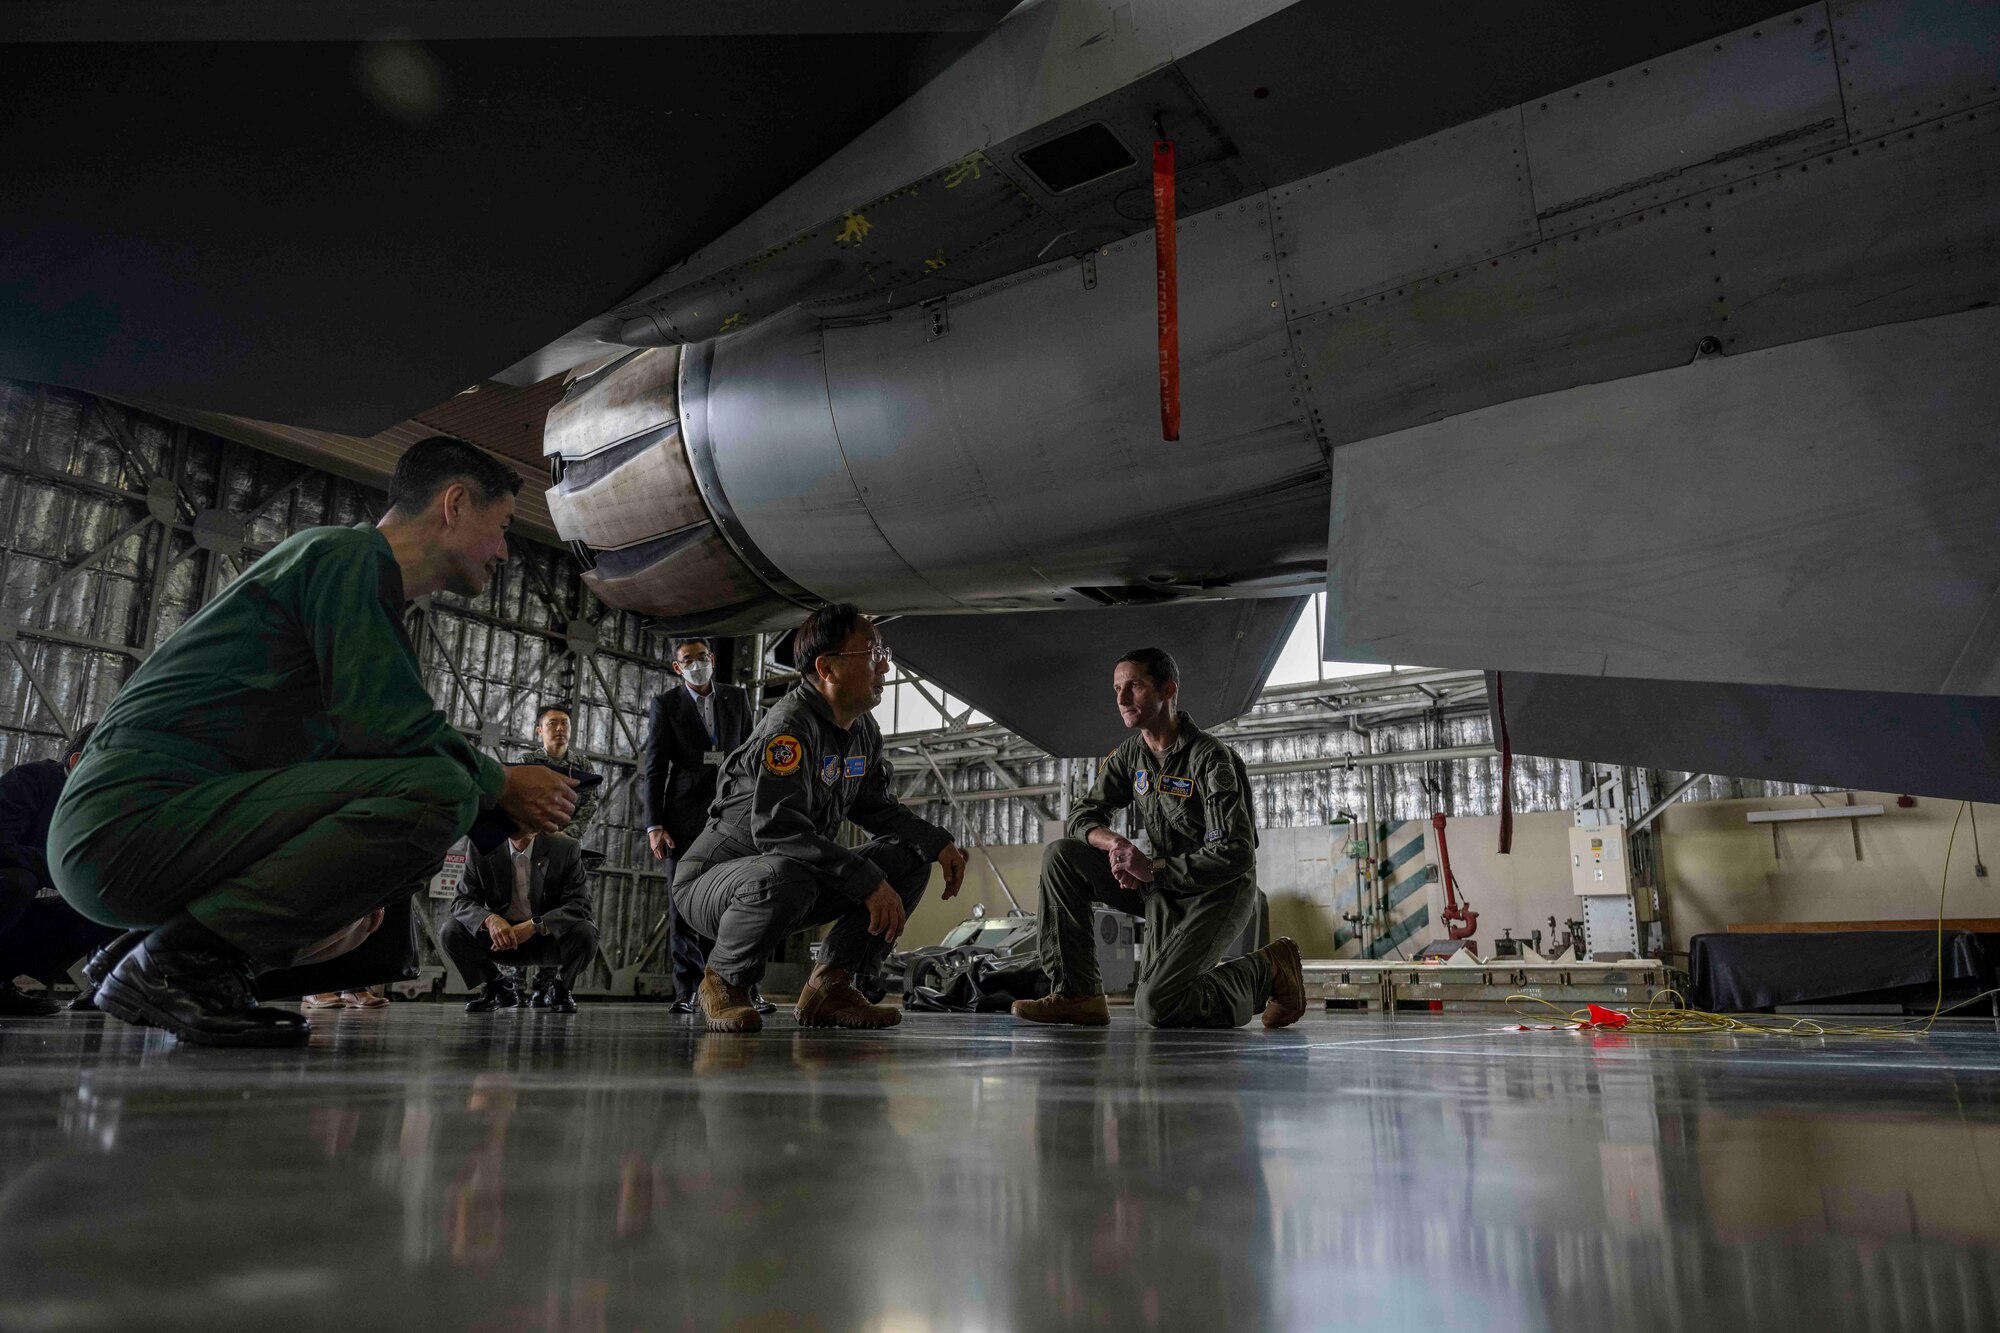 A group of people kneel as they look under a fighter jet in a hangar at Misawa Air Base.